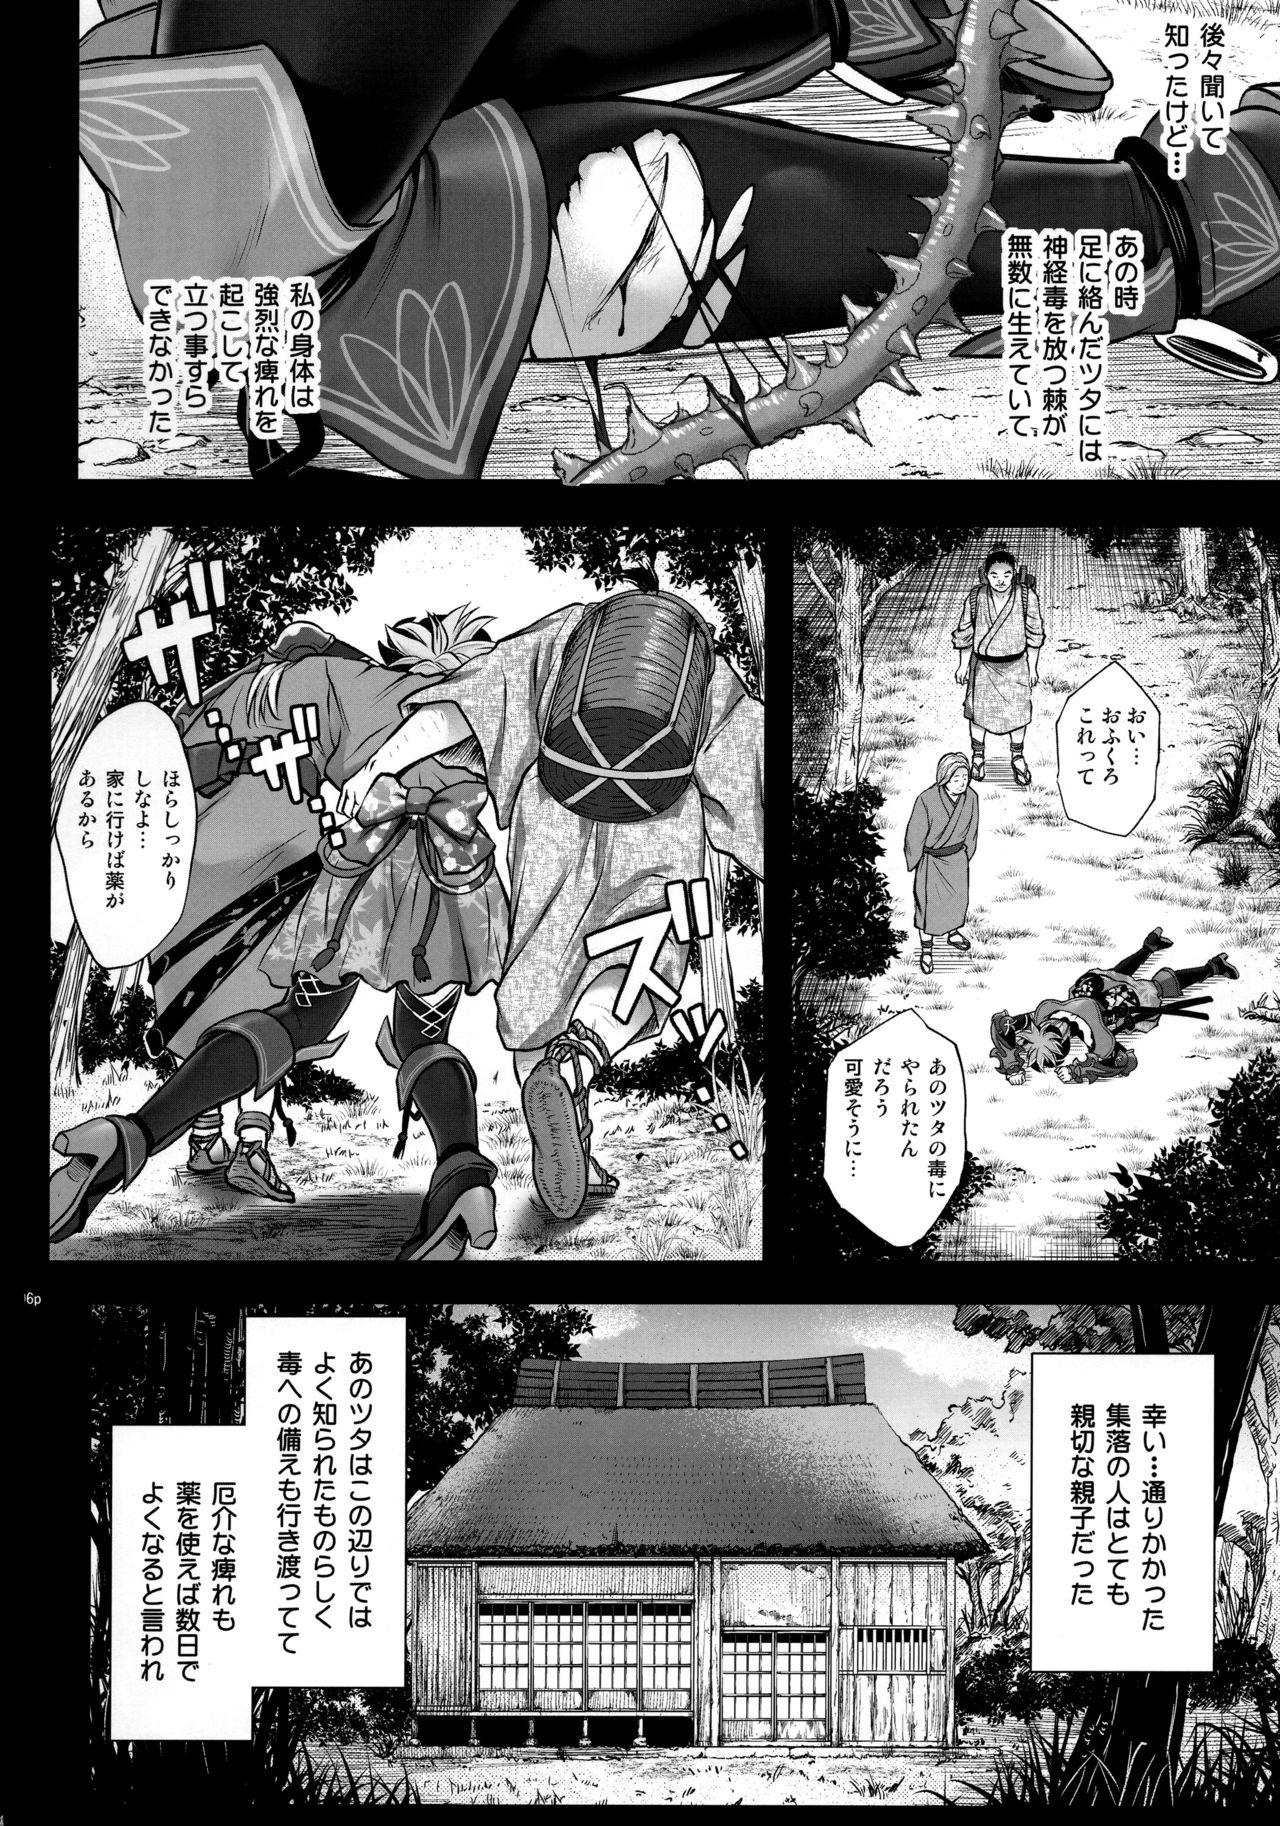 Negao T-32 hooollow - Fate grand order Good - Page 6